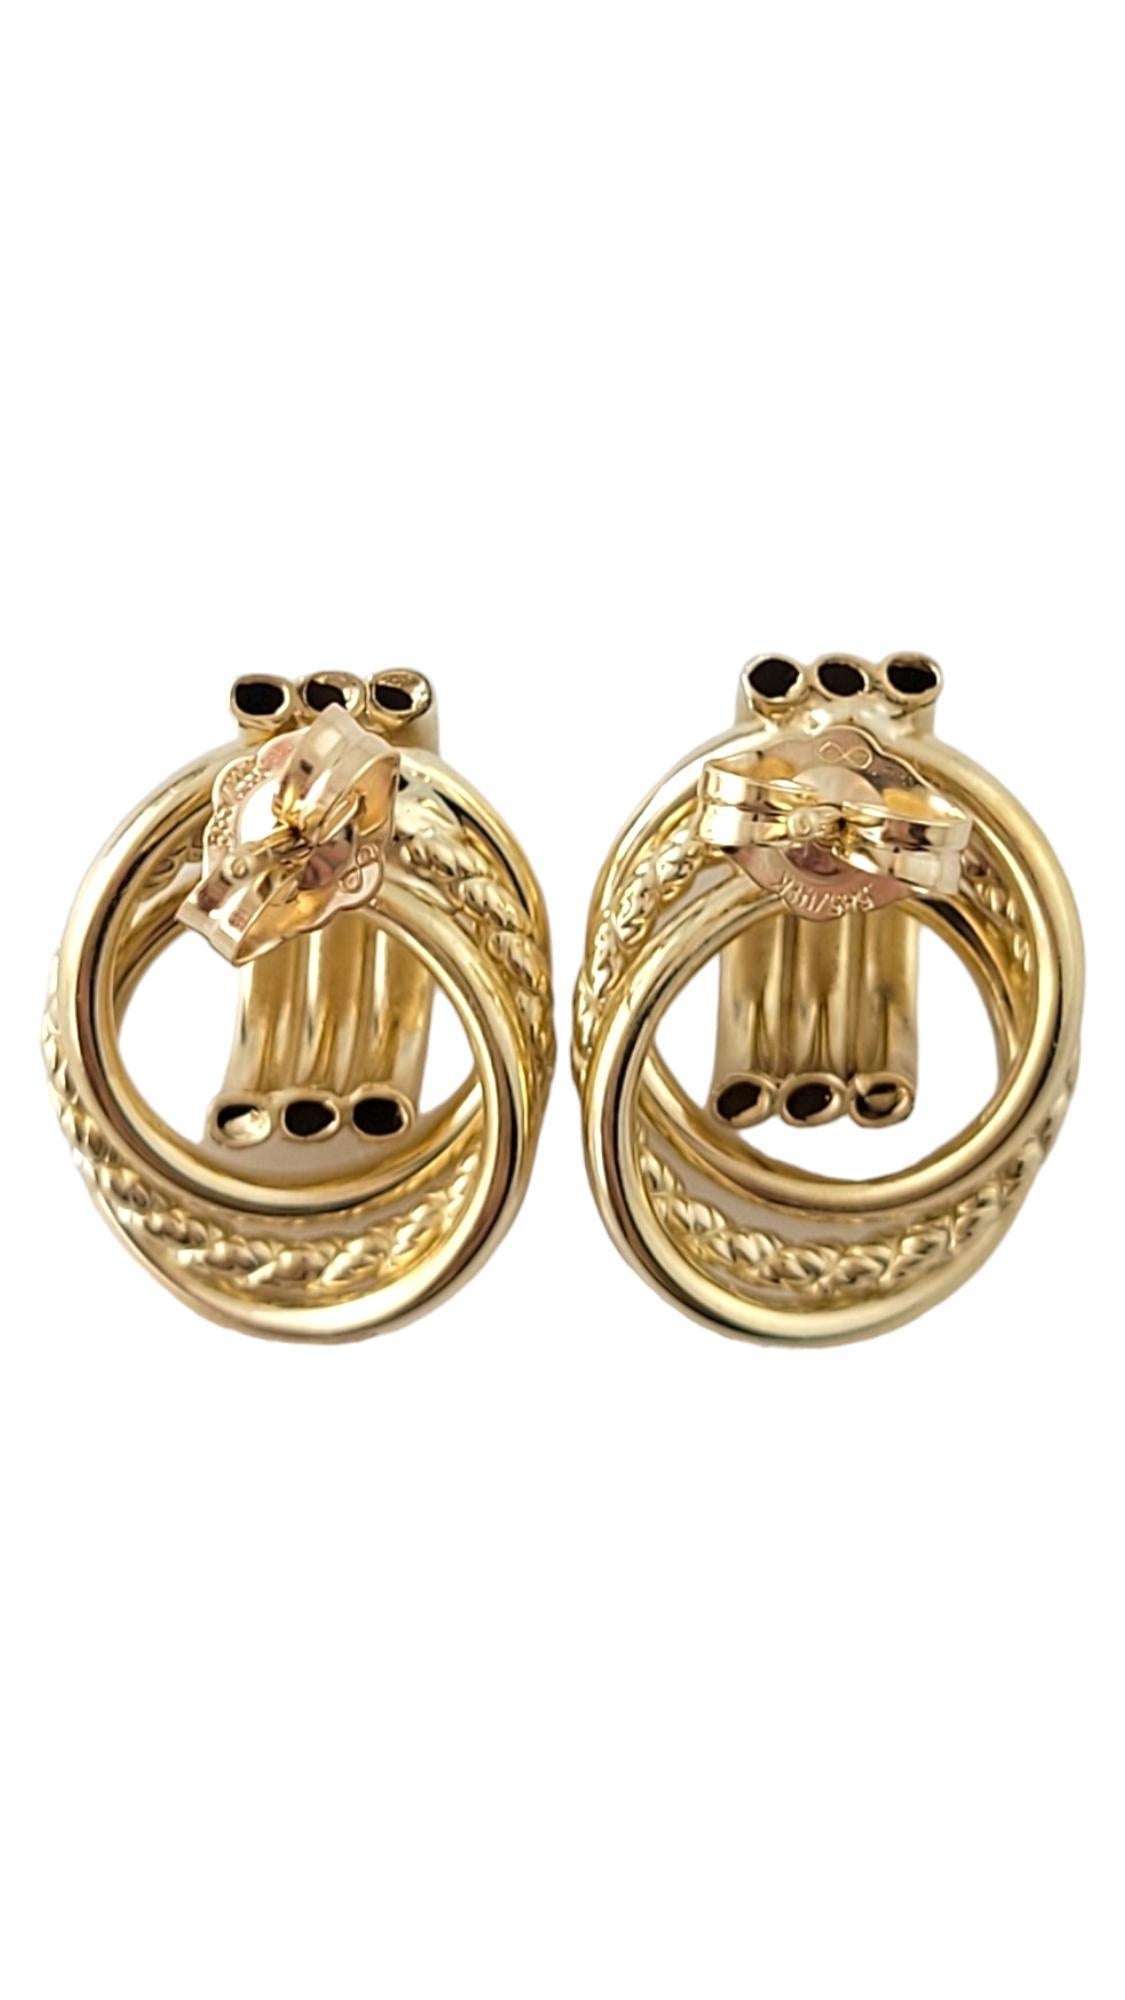 14K Yellow Gold Knot Door Knocker Earrings #16871 In Good Condition For Sale In Washington Depot, CT